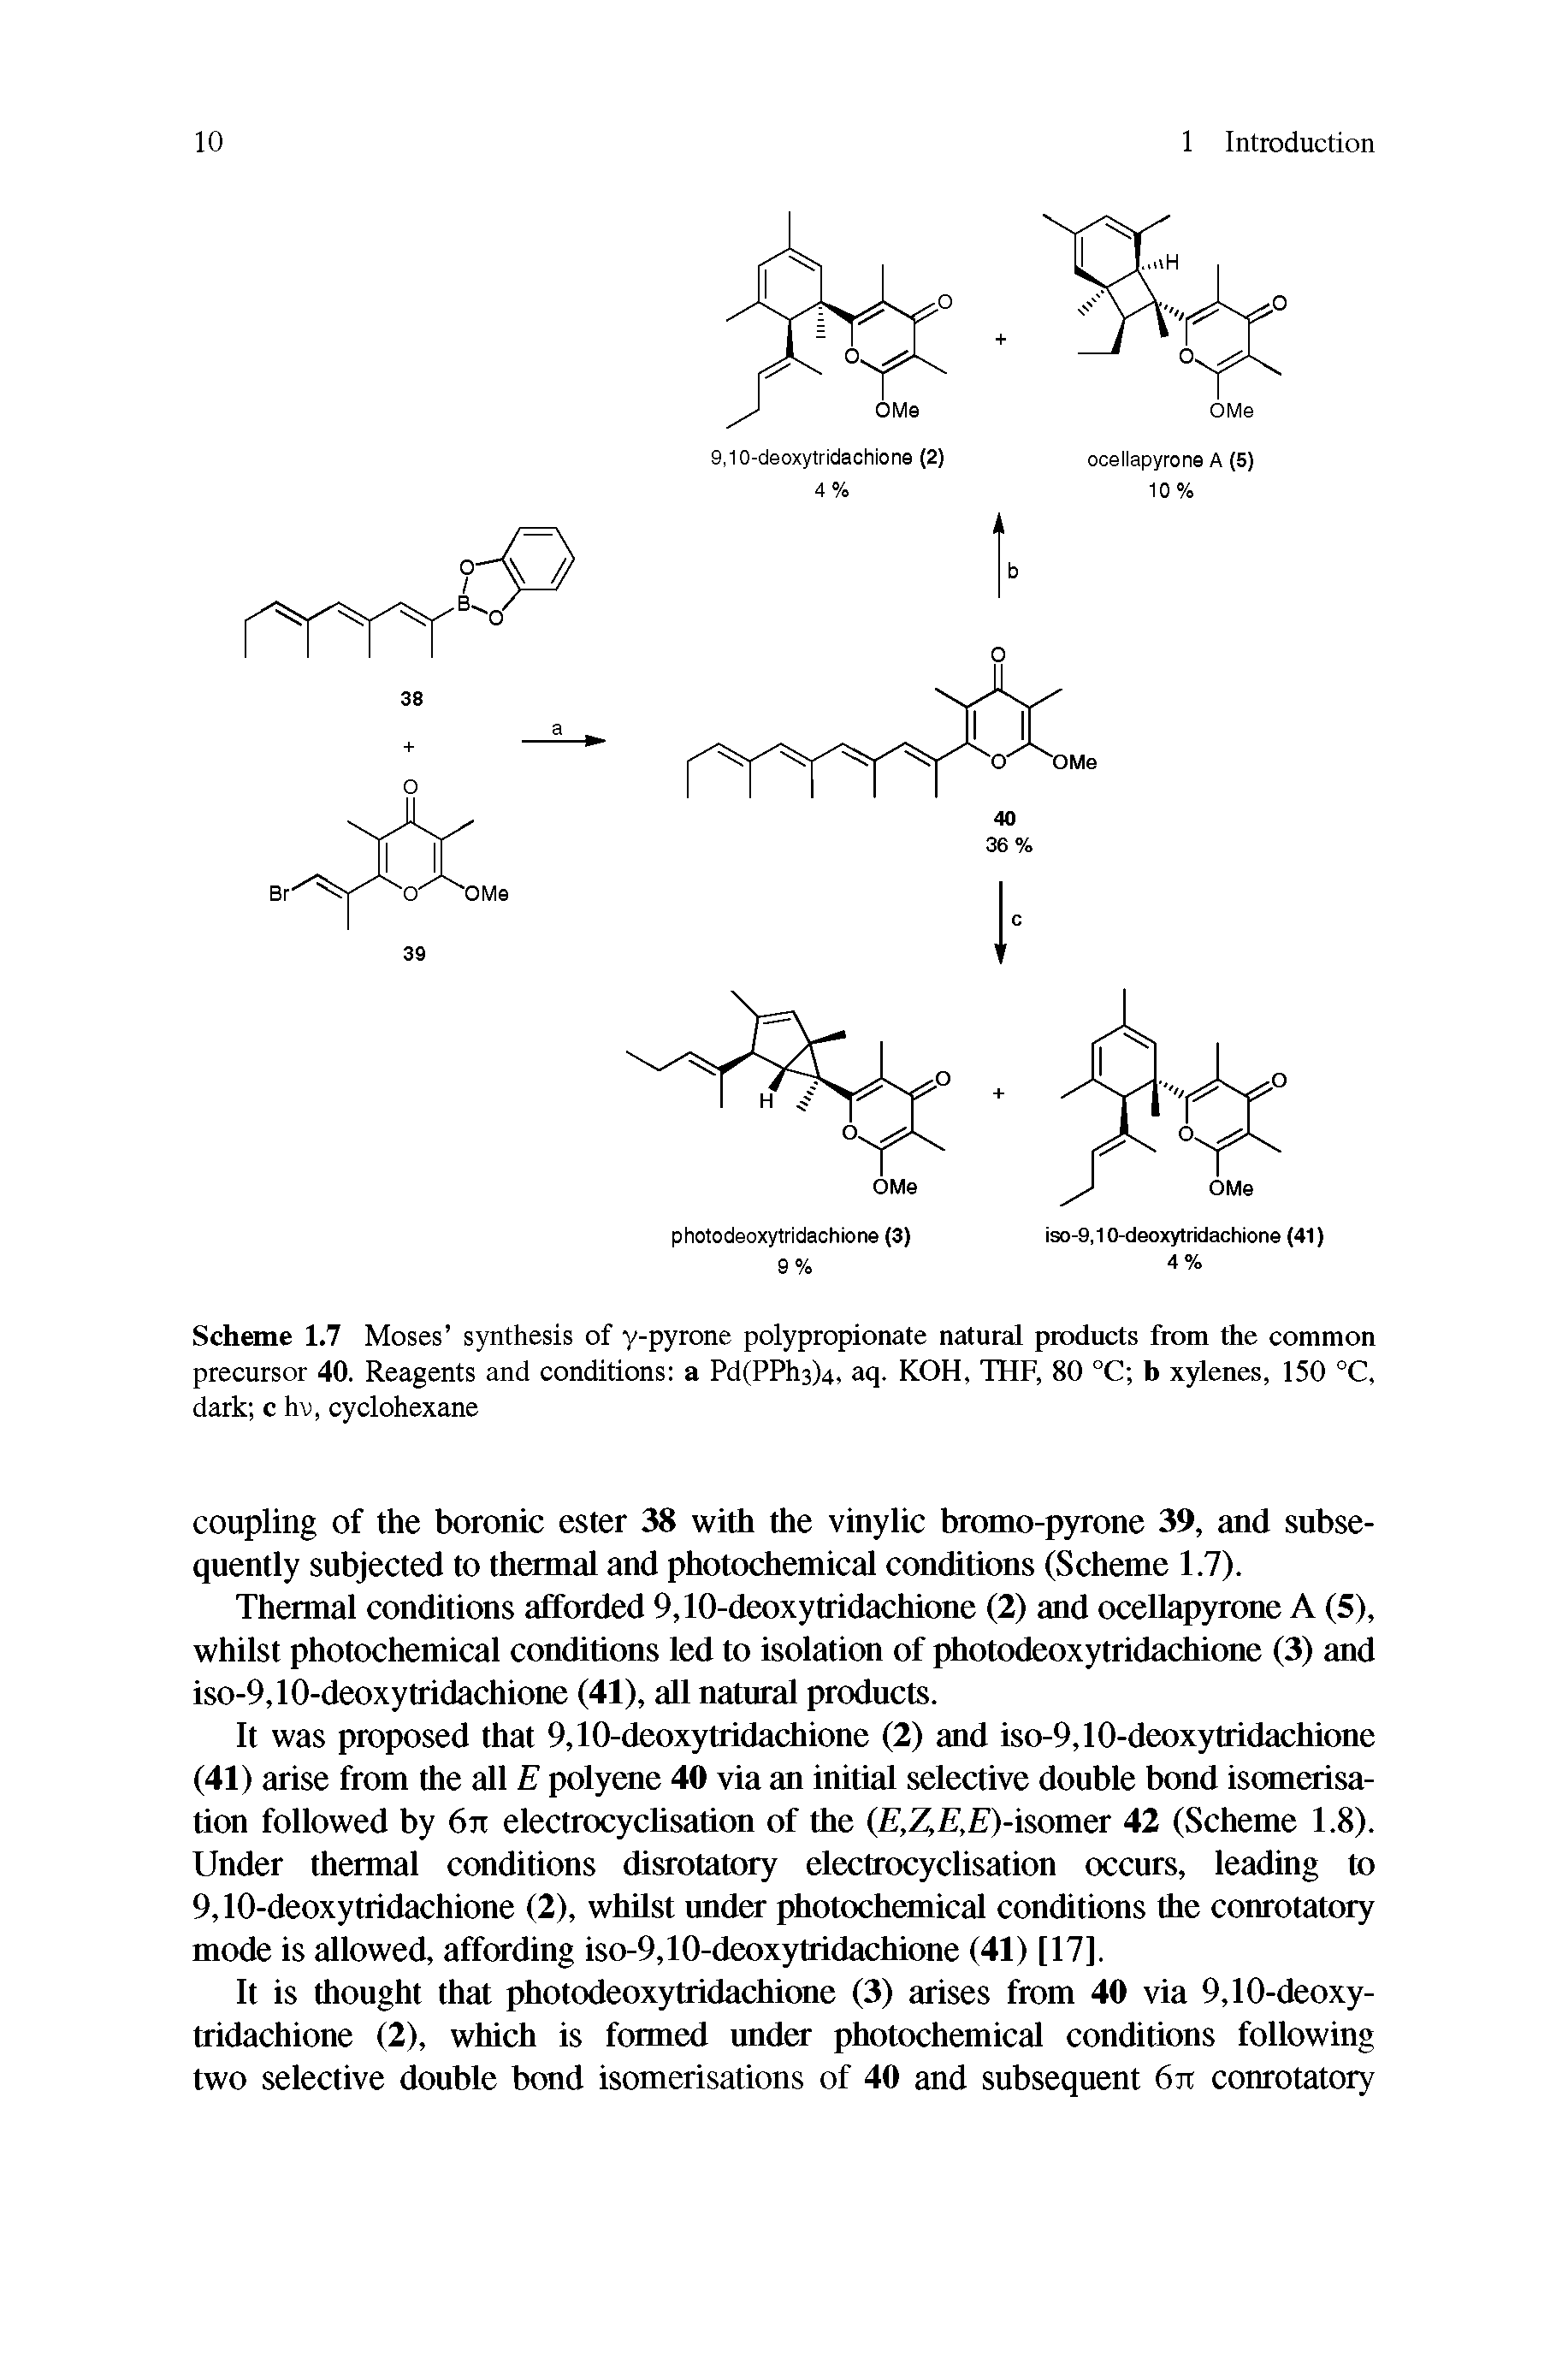 Scheme 1.7 Moses synthesis of y-pyrone polypropionate natural products from the common precursor 40. Reagents and conditions a Pd(PPh3)4, aq. KOH, THF, 80 °C b xylenes, 150 °C, dark c hv, cyclohexane...